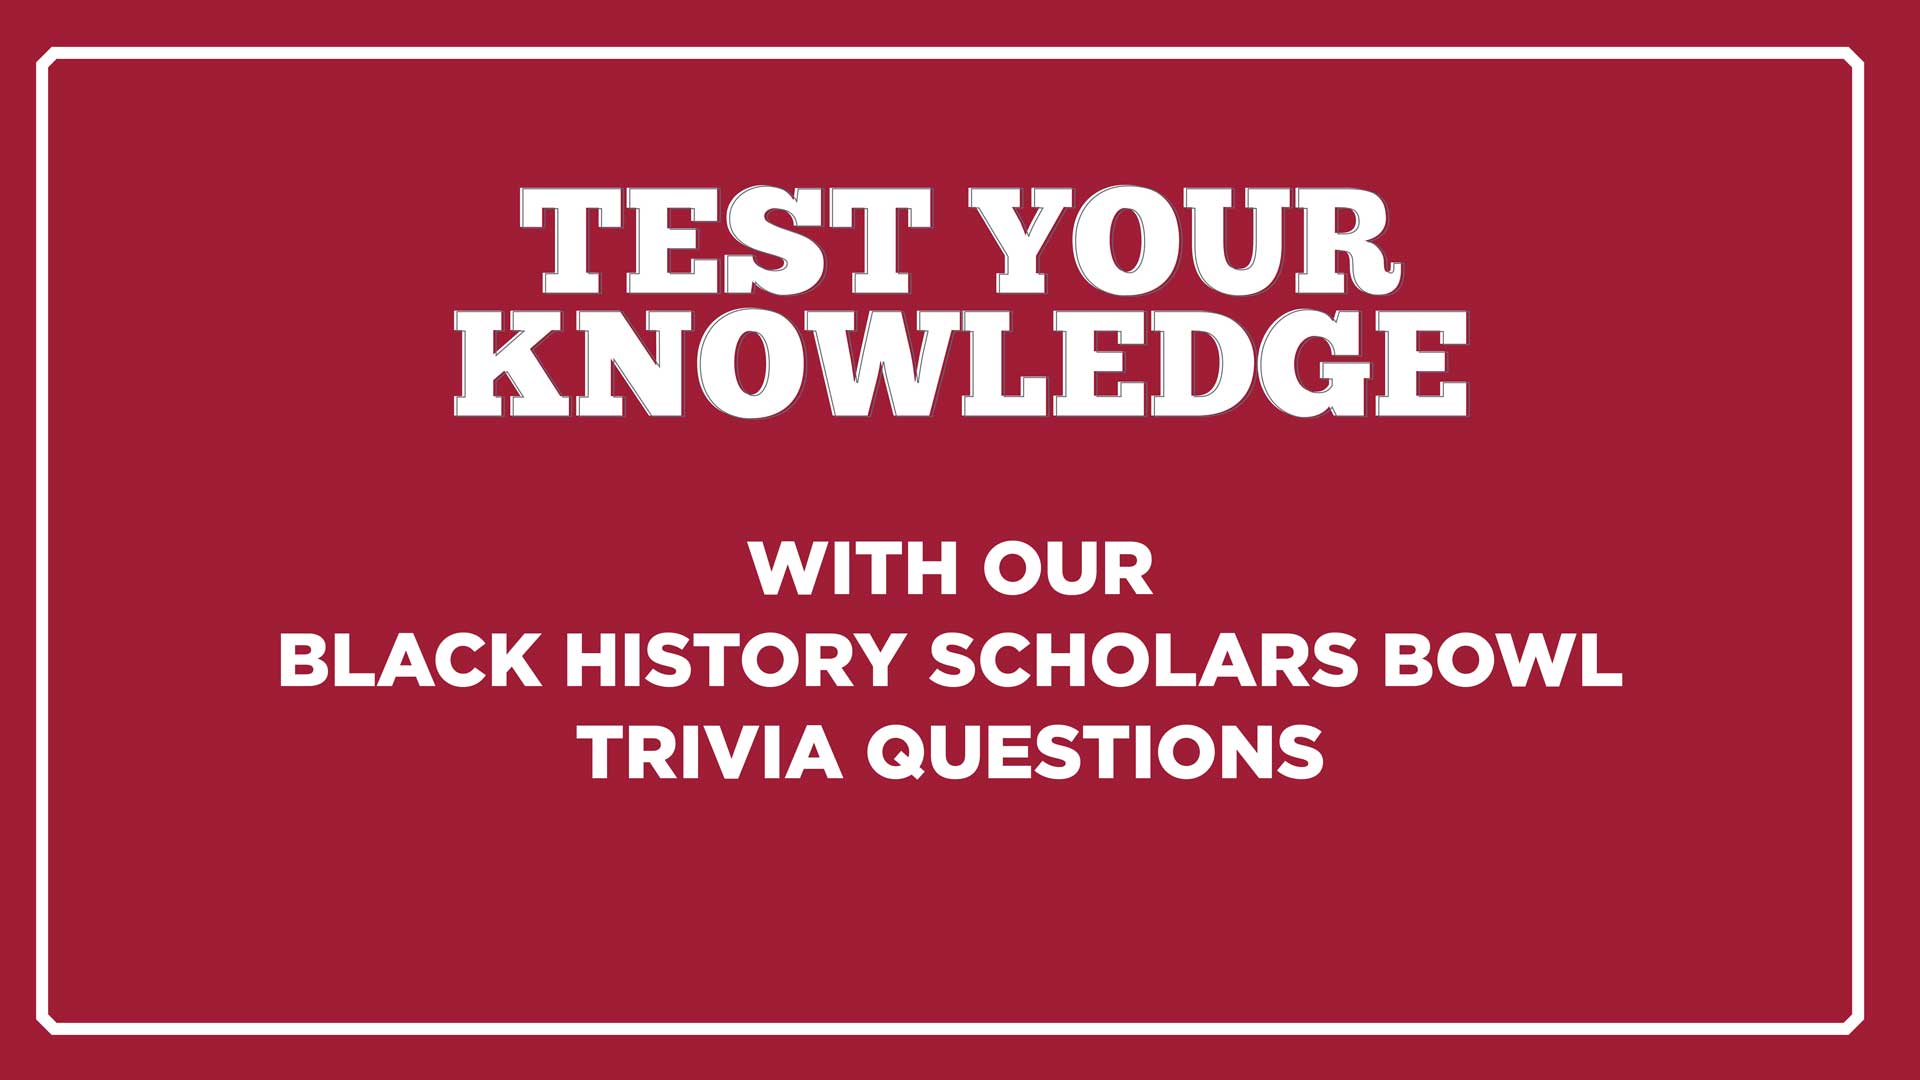 Test your knowledge with our Black History Scholars Bowl trivia questions